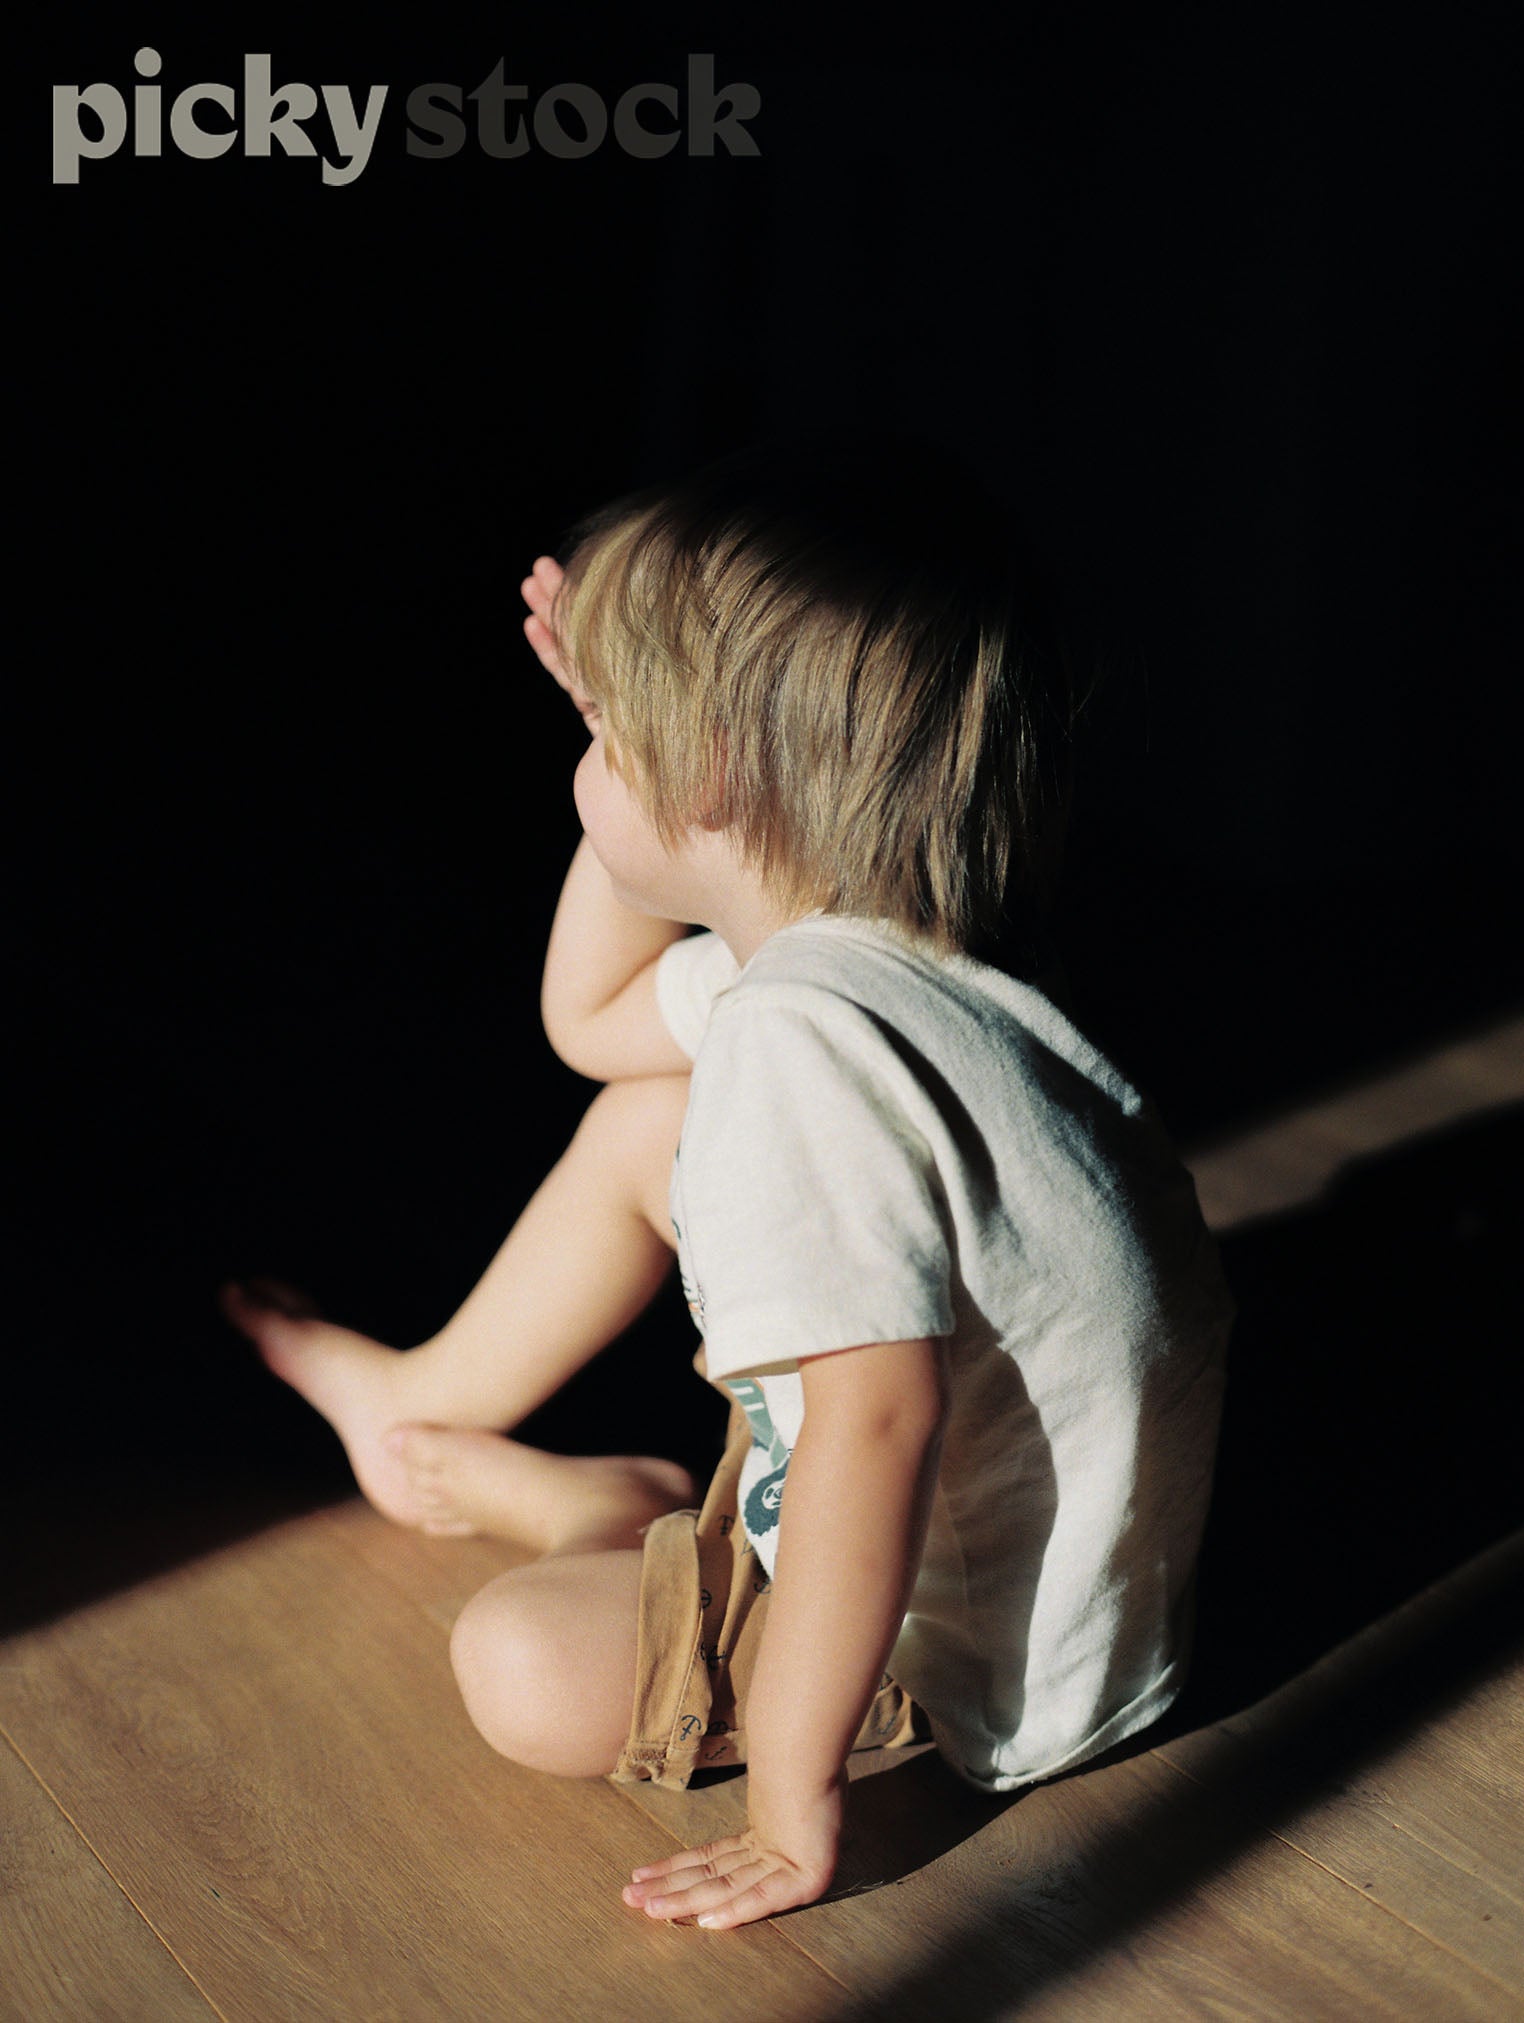 Small blonde young boy sitting on wooden floor. Sitting in light, with dark shadows surrounding him. 